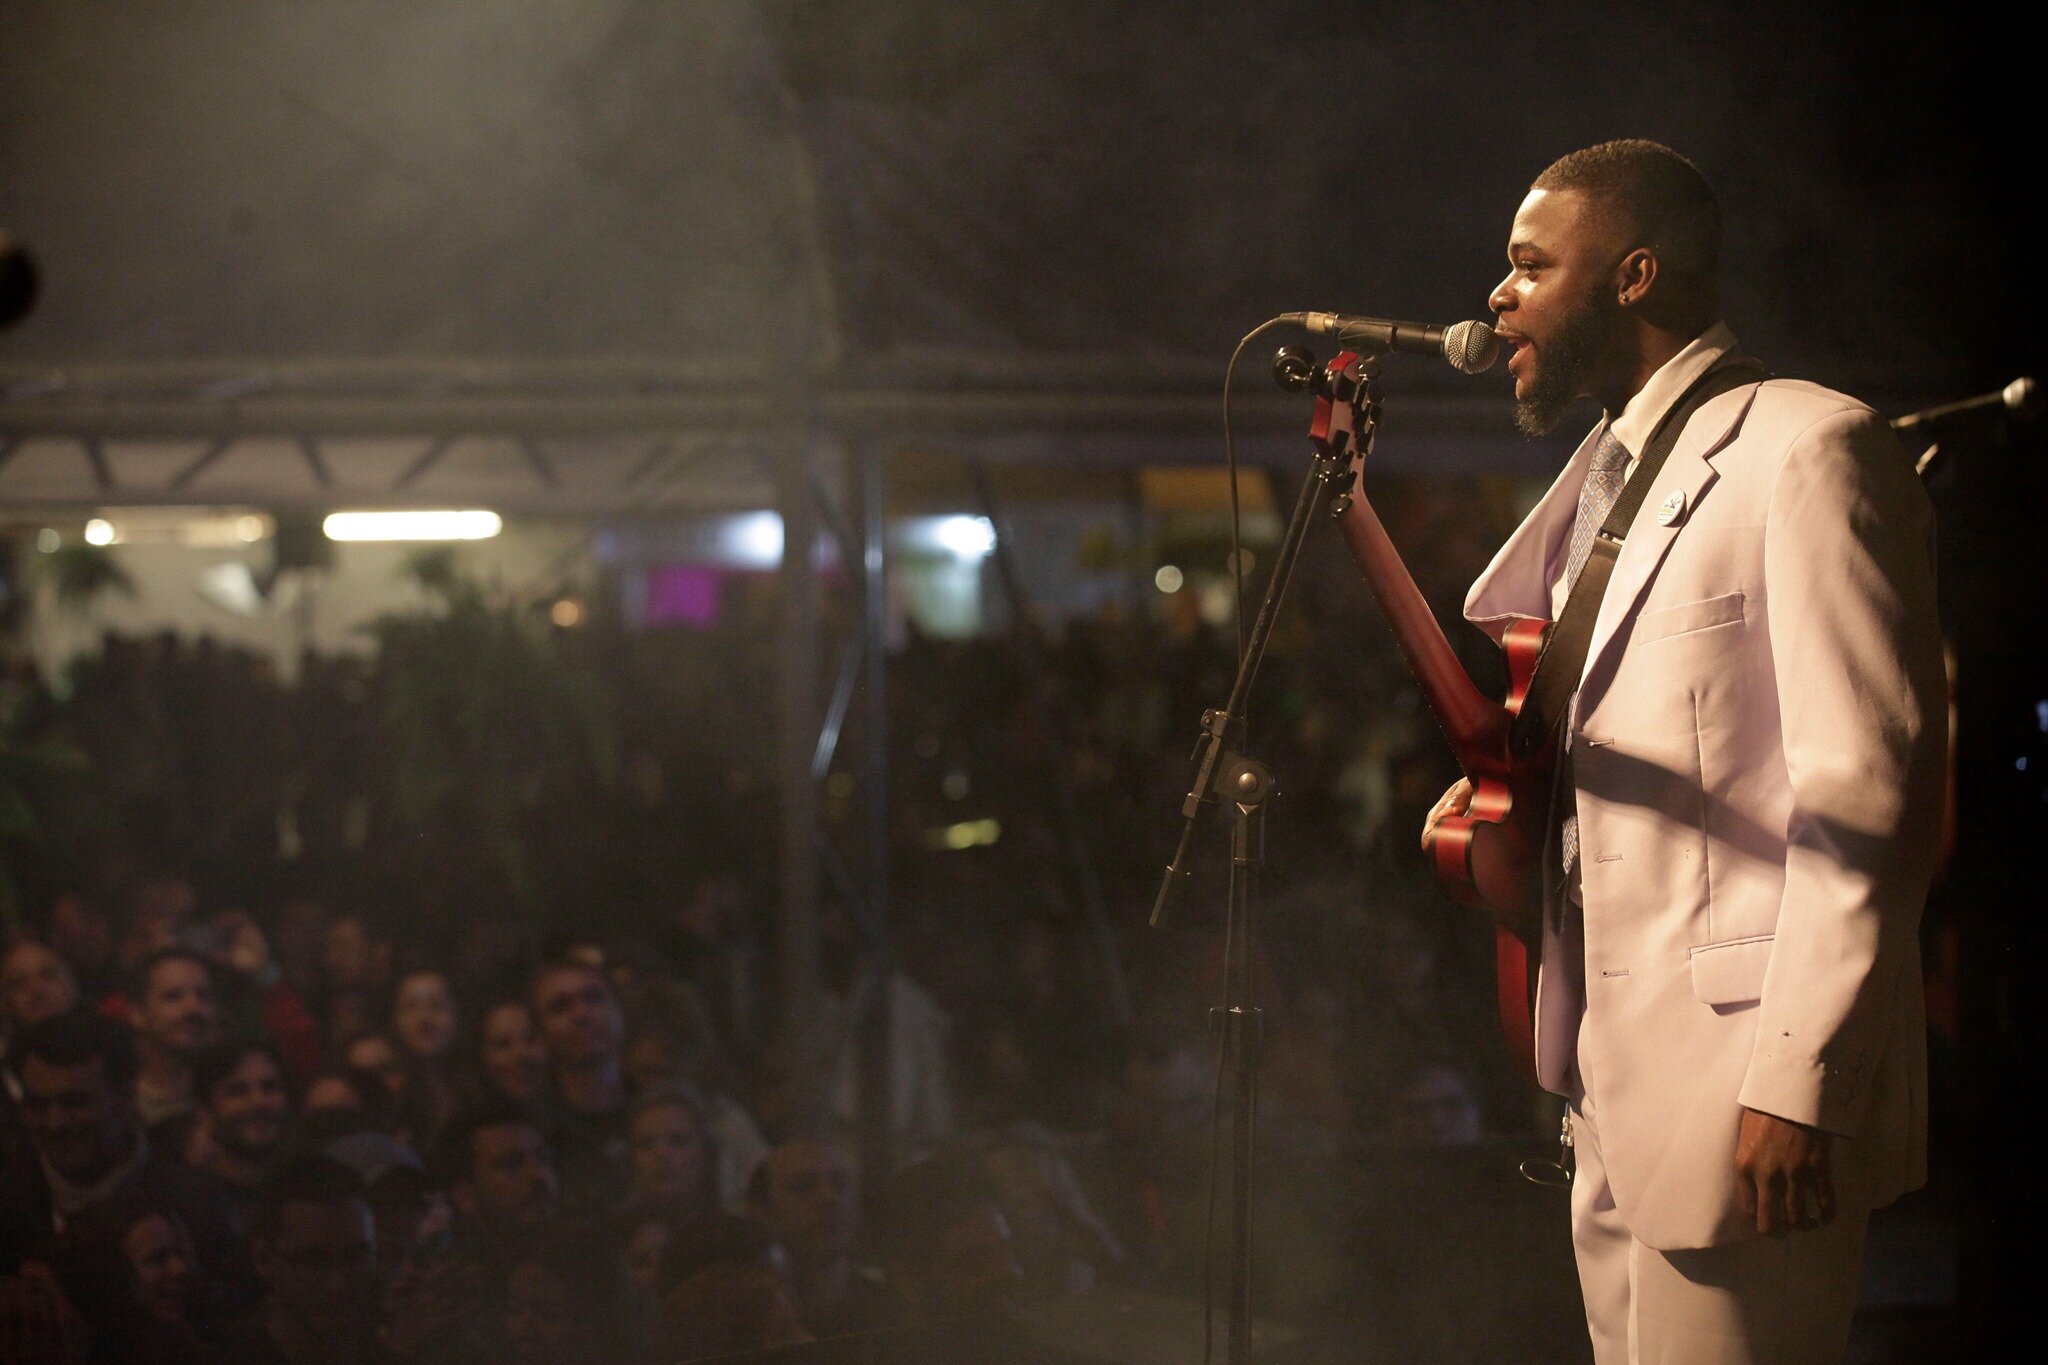 Keith Johnson performs on the main stage at the 2019 Mississippi Delta Blues Festival in Caxias do Sul, Brazil.